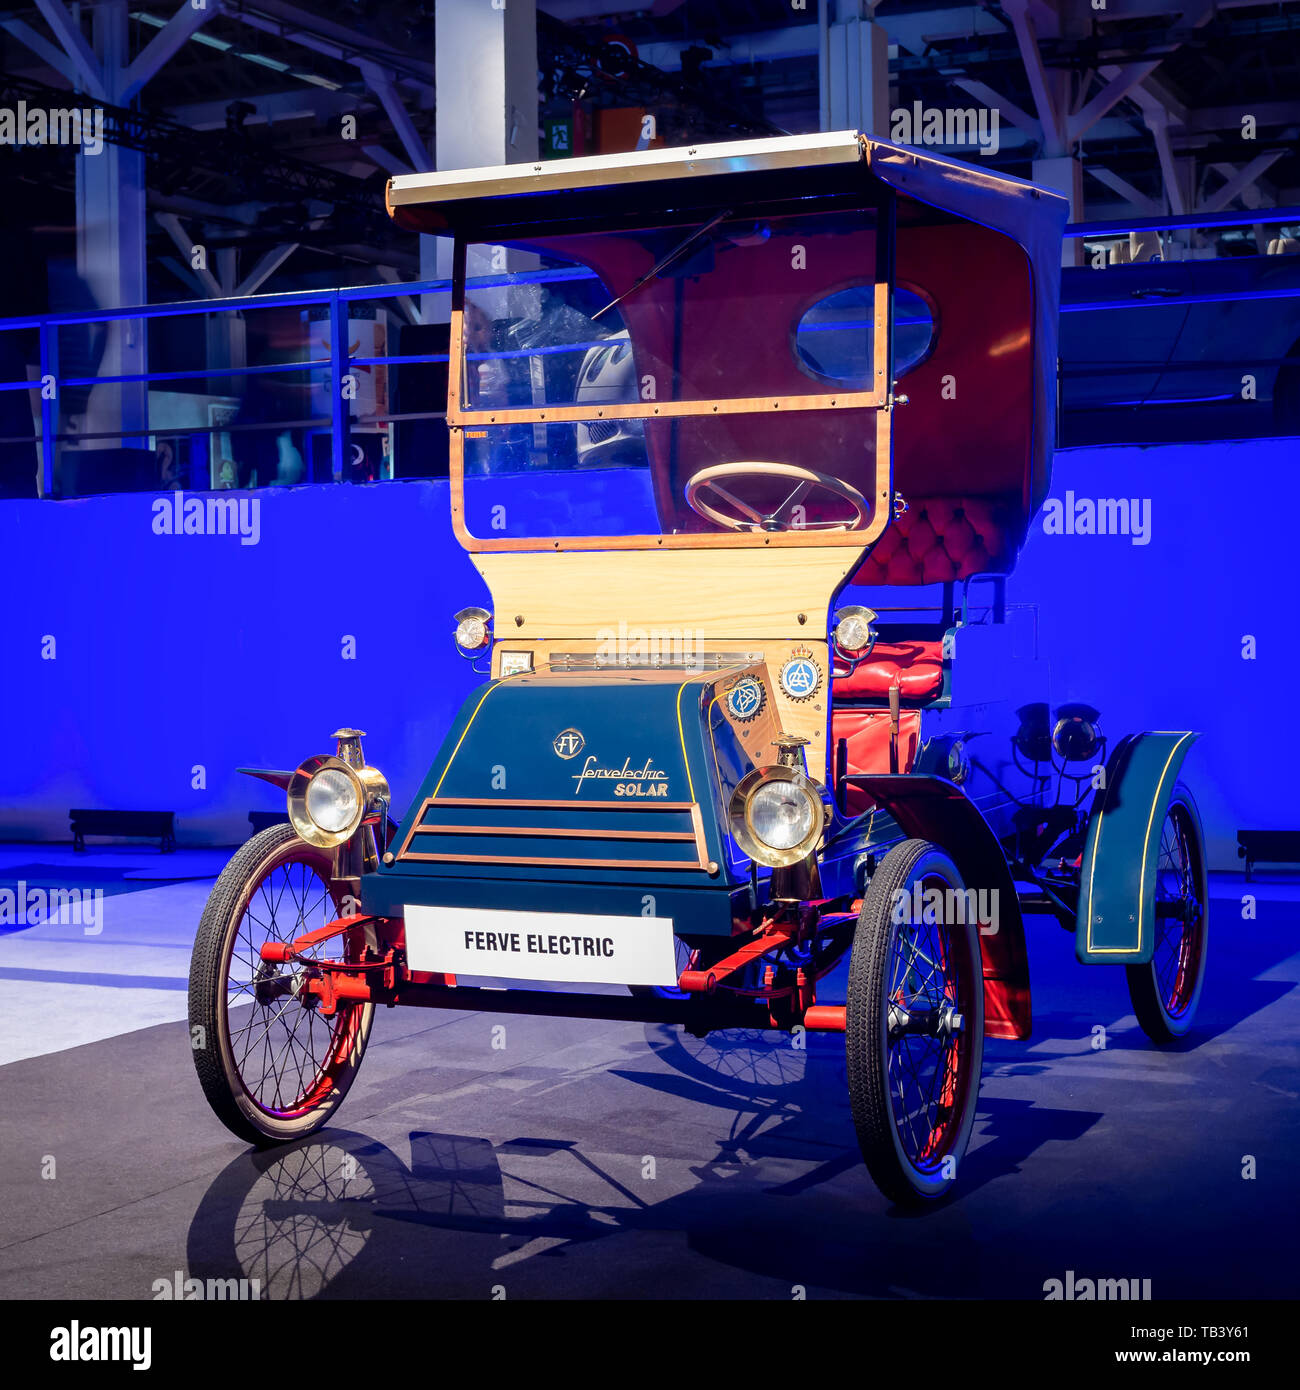 BARCELONA, SPAIN-MAY 11, 2019: 1967 Fervelectric Coche Electrico Espanol at the 100 years of the Automobile Exhibition Stock Photo